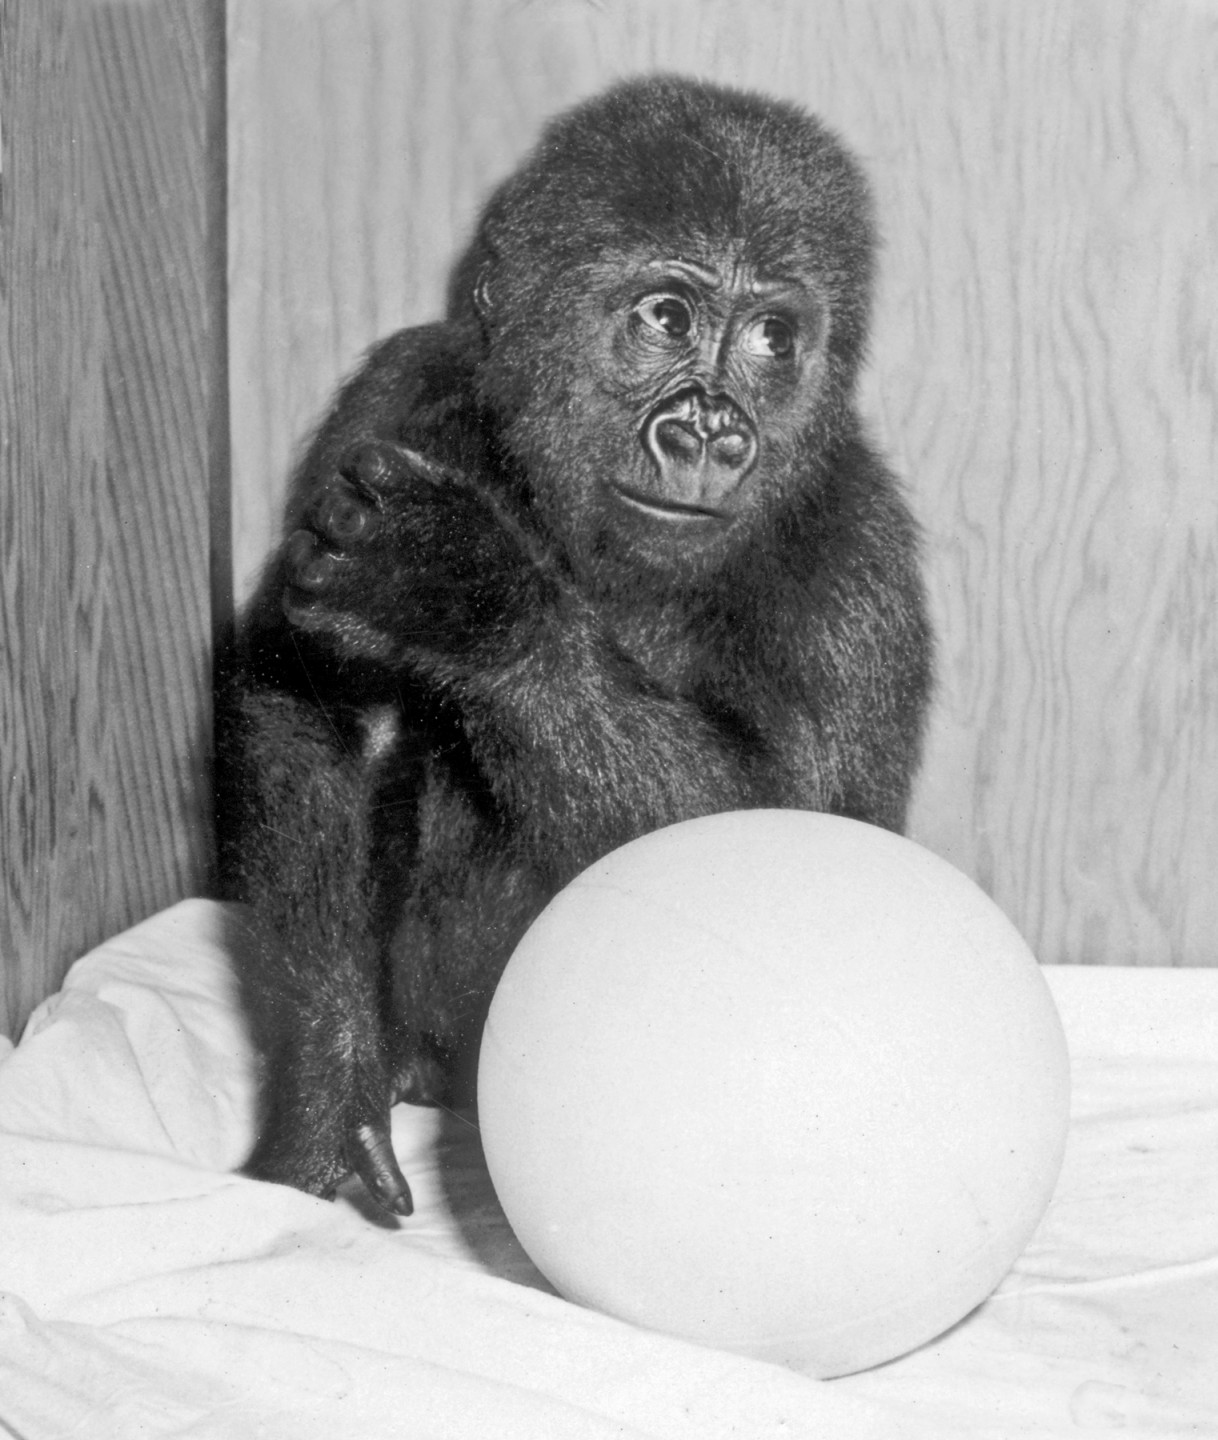 Trib, a western lowland gorilla, arrived at the Zoo on July 30, 1960, and his journey to the San Diego Zoo was arranged by the Brazzaville Zoo in Africa.  James S. Copley of the San Diego Evening Tribune donated the funds, and Trib was named in his honor. Trib was the third gorilla that James Copley had funded for the Zoo, and the Zoological Society made him an Honorary Vice-president to thank him for his efforts in helping the Zoo to build a breeding colony of these great apes. Trib was one of four young apes being brought up in the Children's Zoo in 1960. His rambunctious playmates—and fellow troublemakers—were Kakowet the bonobo, Roberta the orangutan, and Cindy the chimpanzee.